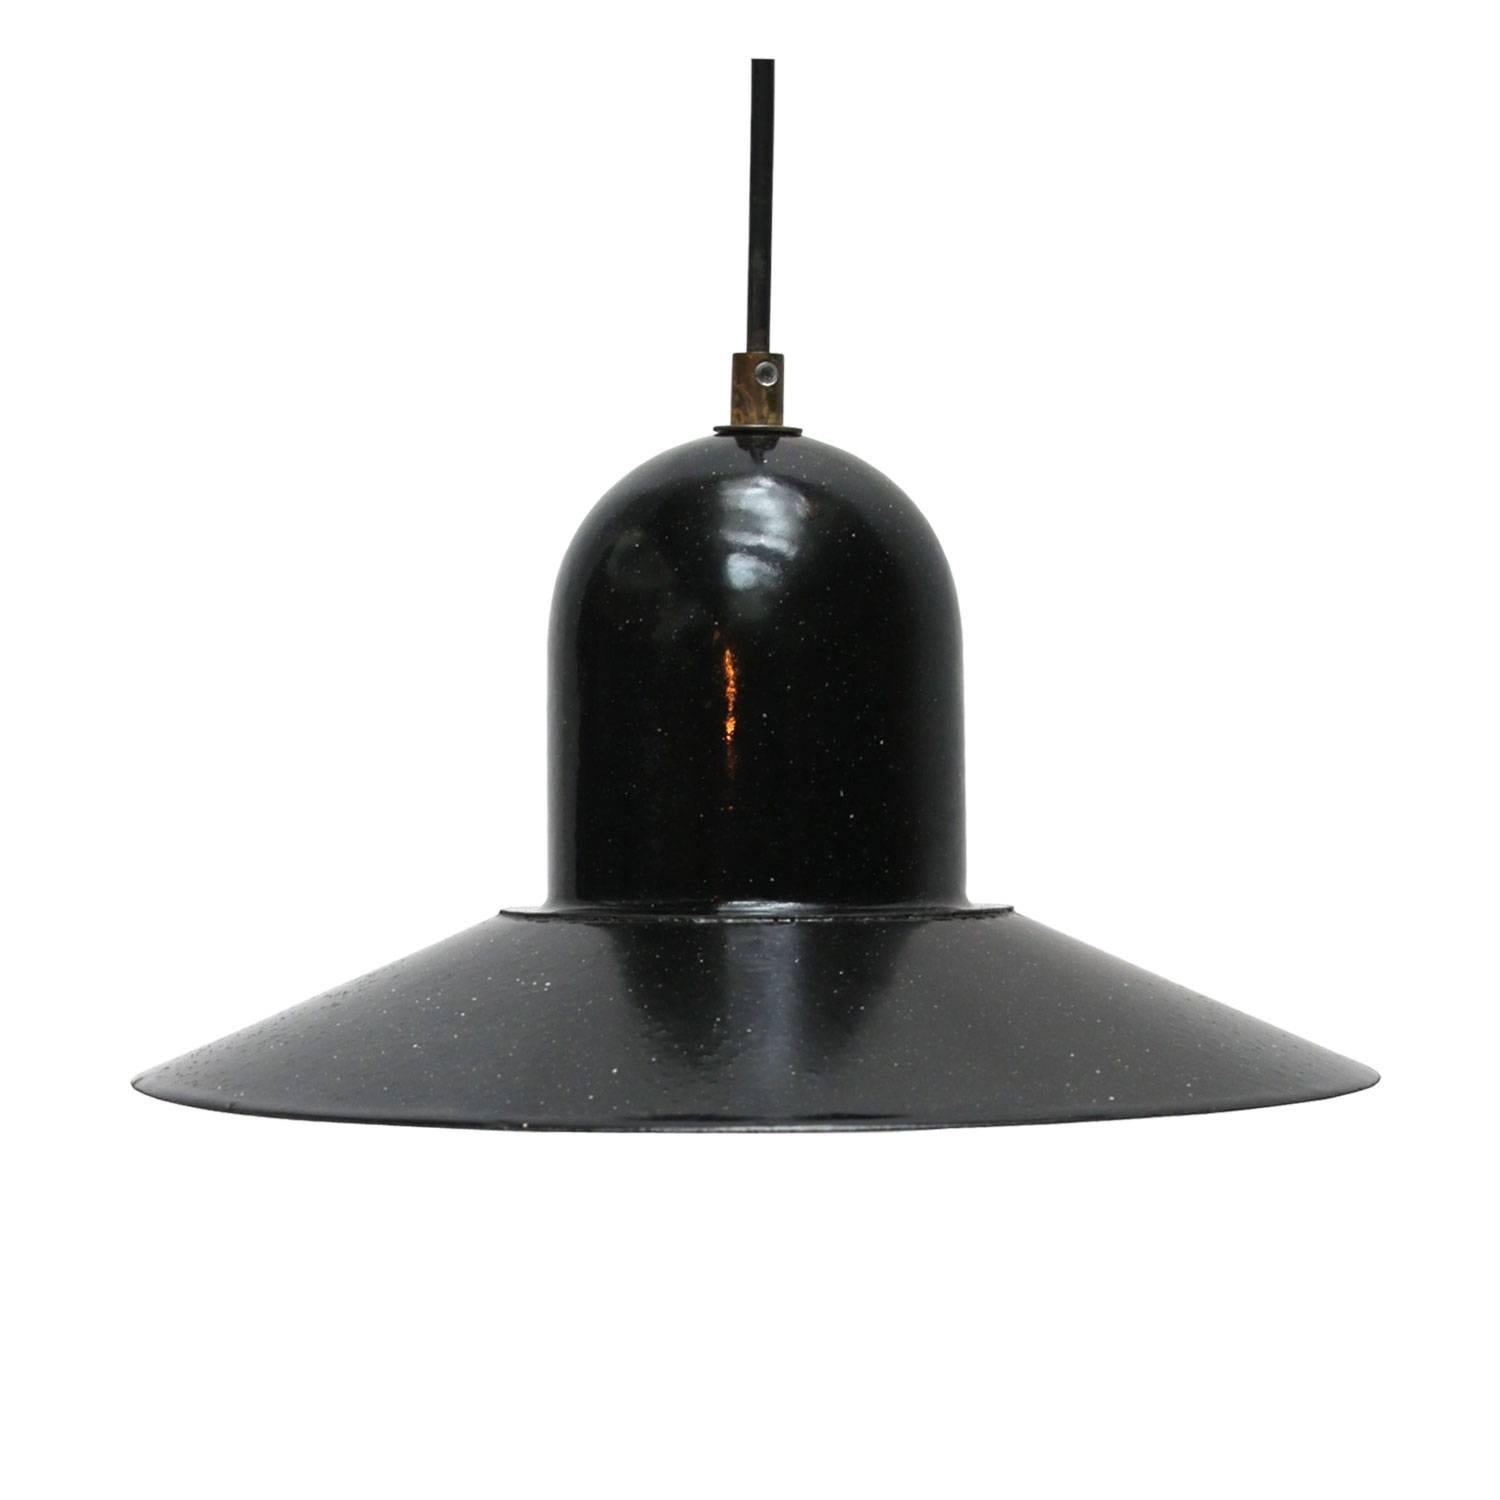 Industrial pendant. Black enamel.

Weight: 1.1 kg / 2.4 lb

All lamps have been made suitable by international standards for incandescent light bulbs, energy-efficient and LED bulbs. E26/E27 bulb holders and new wiring are CE certified or UL Listed.